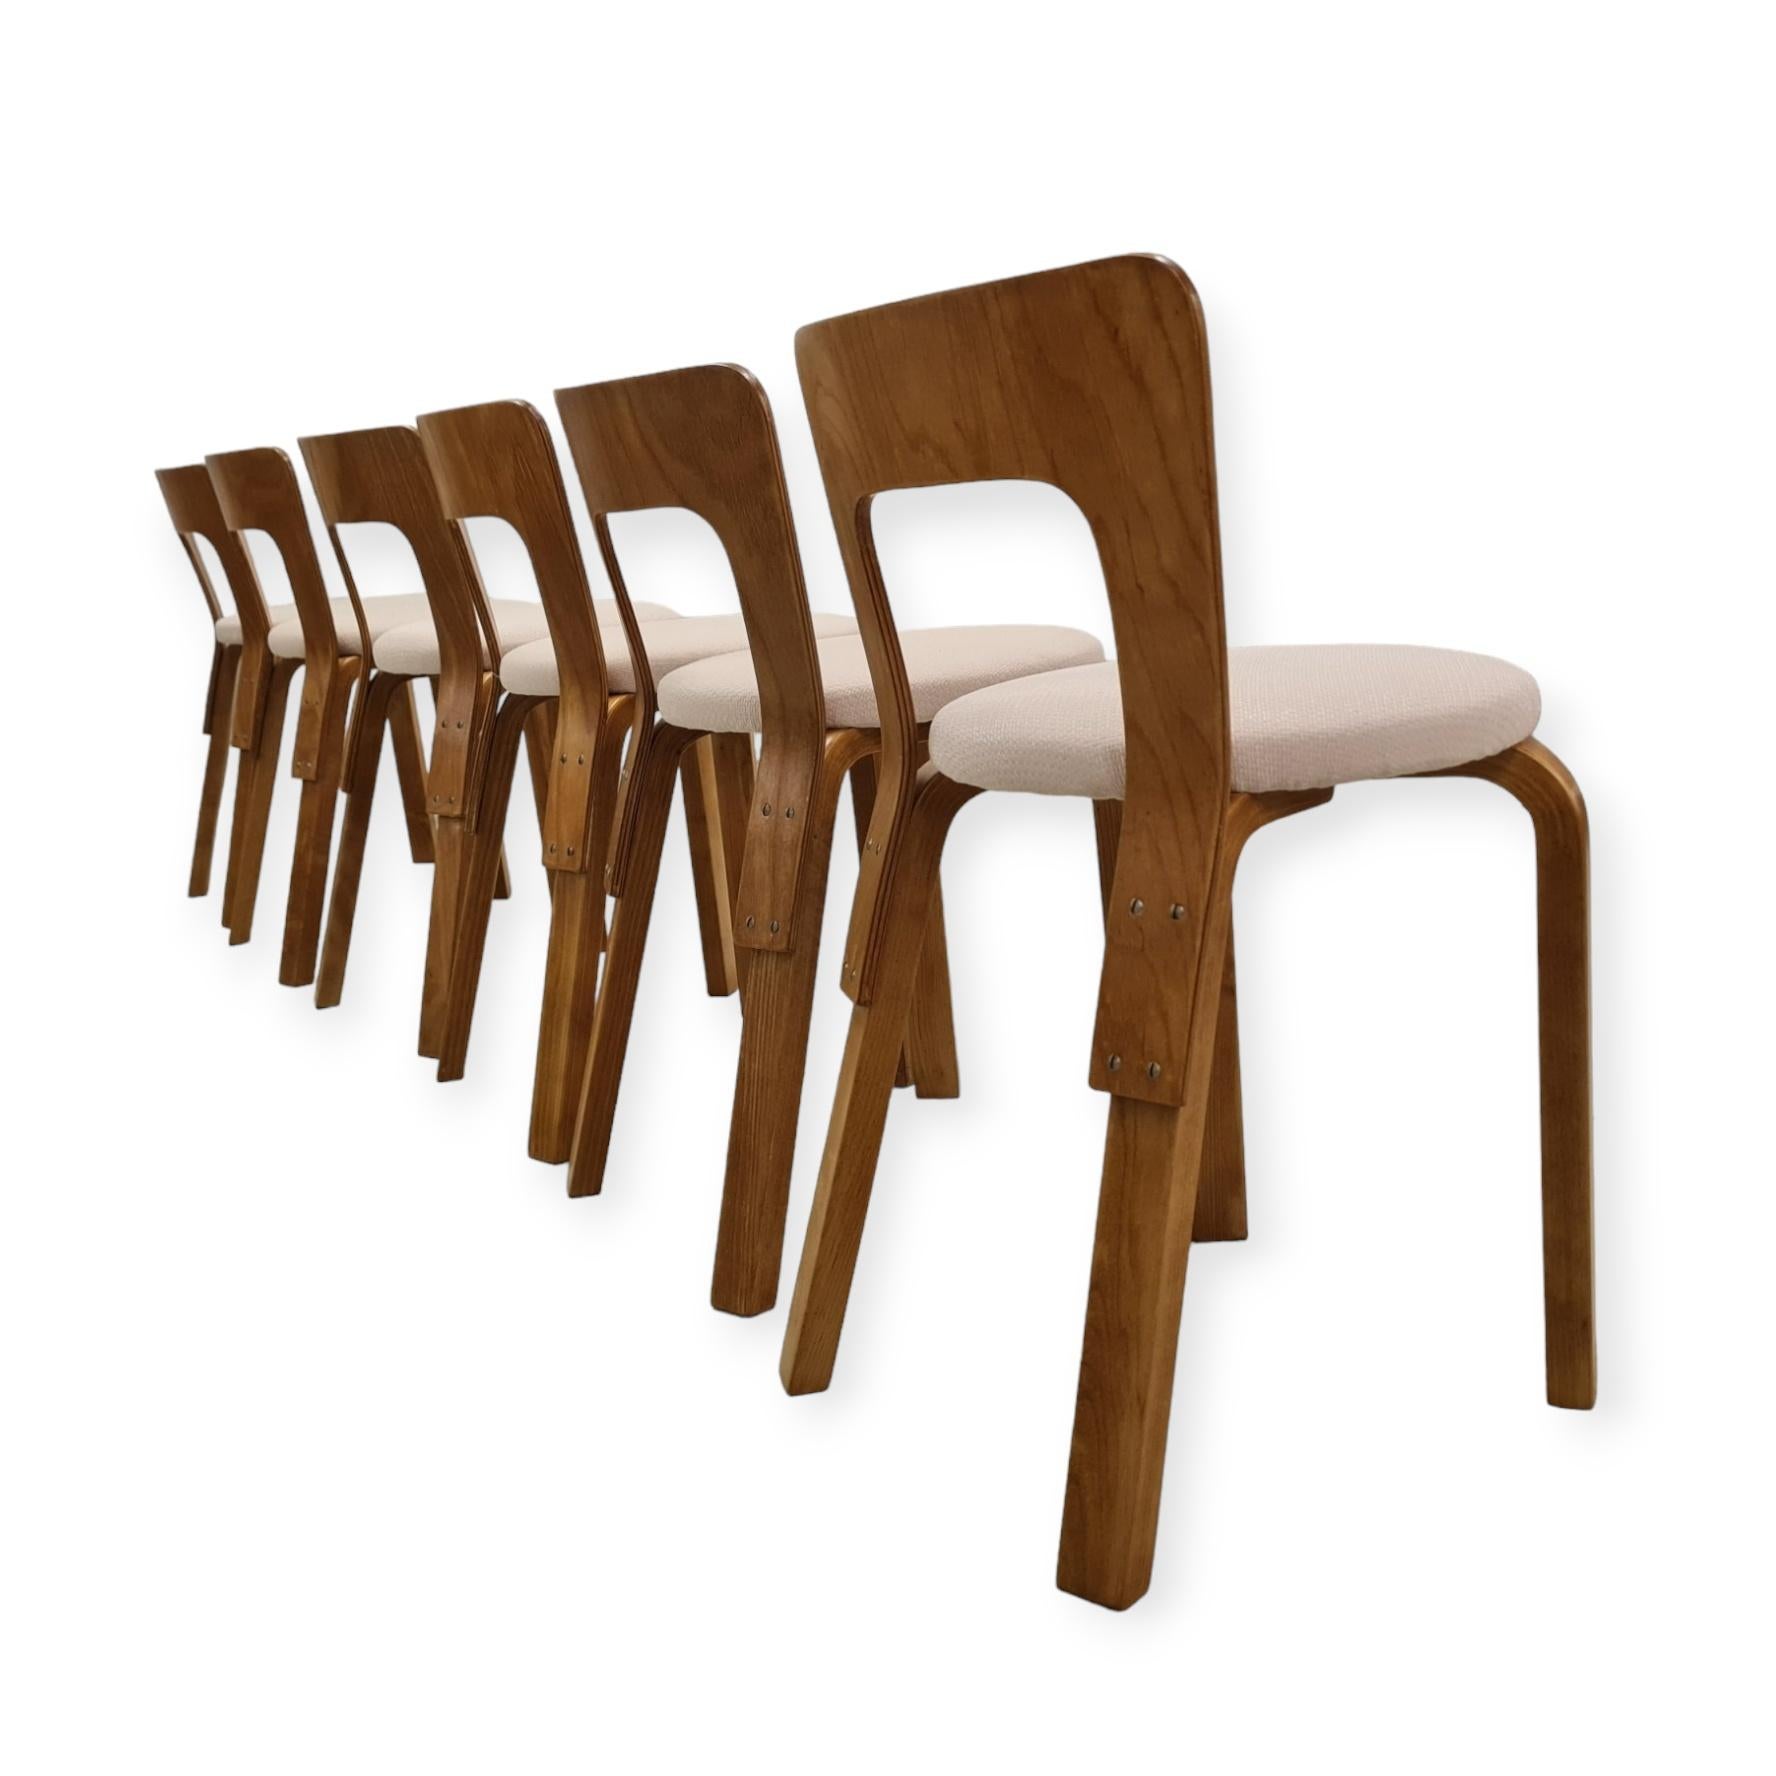 Mid-20th Century Set of Six Alvar Aalto Model 65 Chairs Model 1950s For Sale